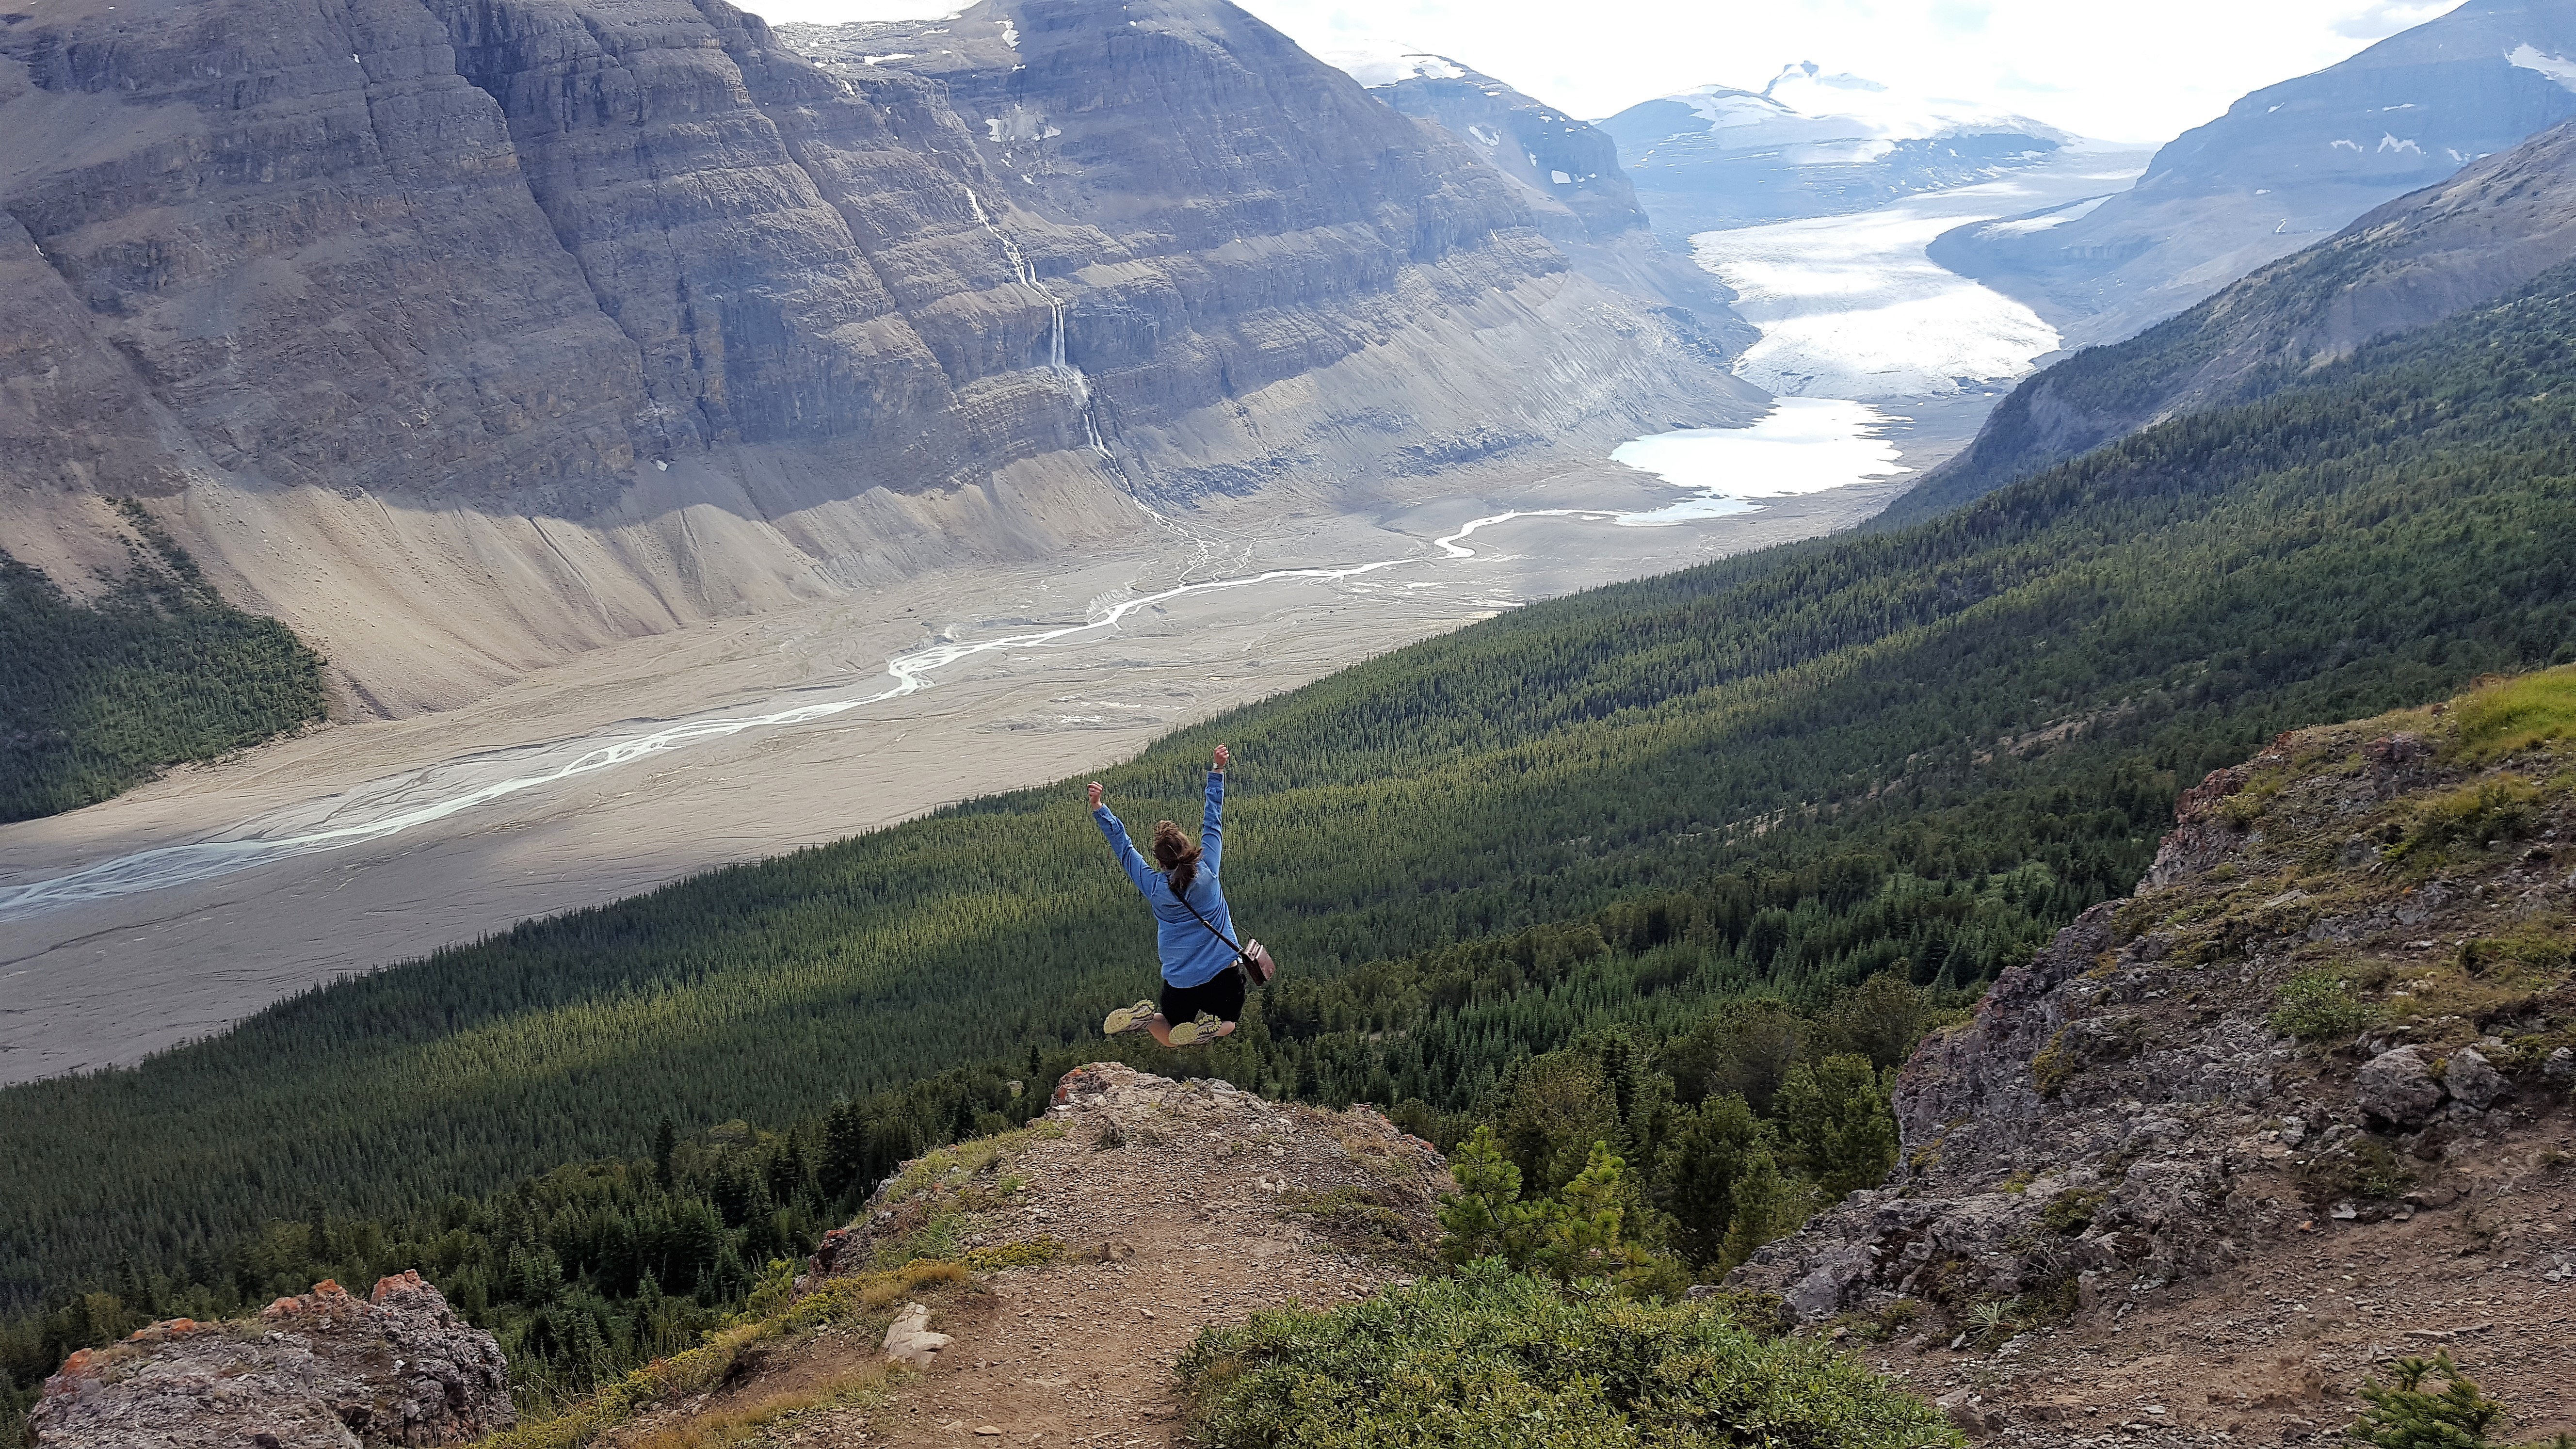 white woman with back to camera mid-jump with hands and arms outstretched above their head and feet tucked up in a jump. They are standing on the edge of a cliff/ridge with a wide vista of a valley in the background, including the Saskatchewan Glacier and mouth of the North Saskatchewan river in the background.